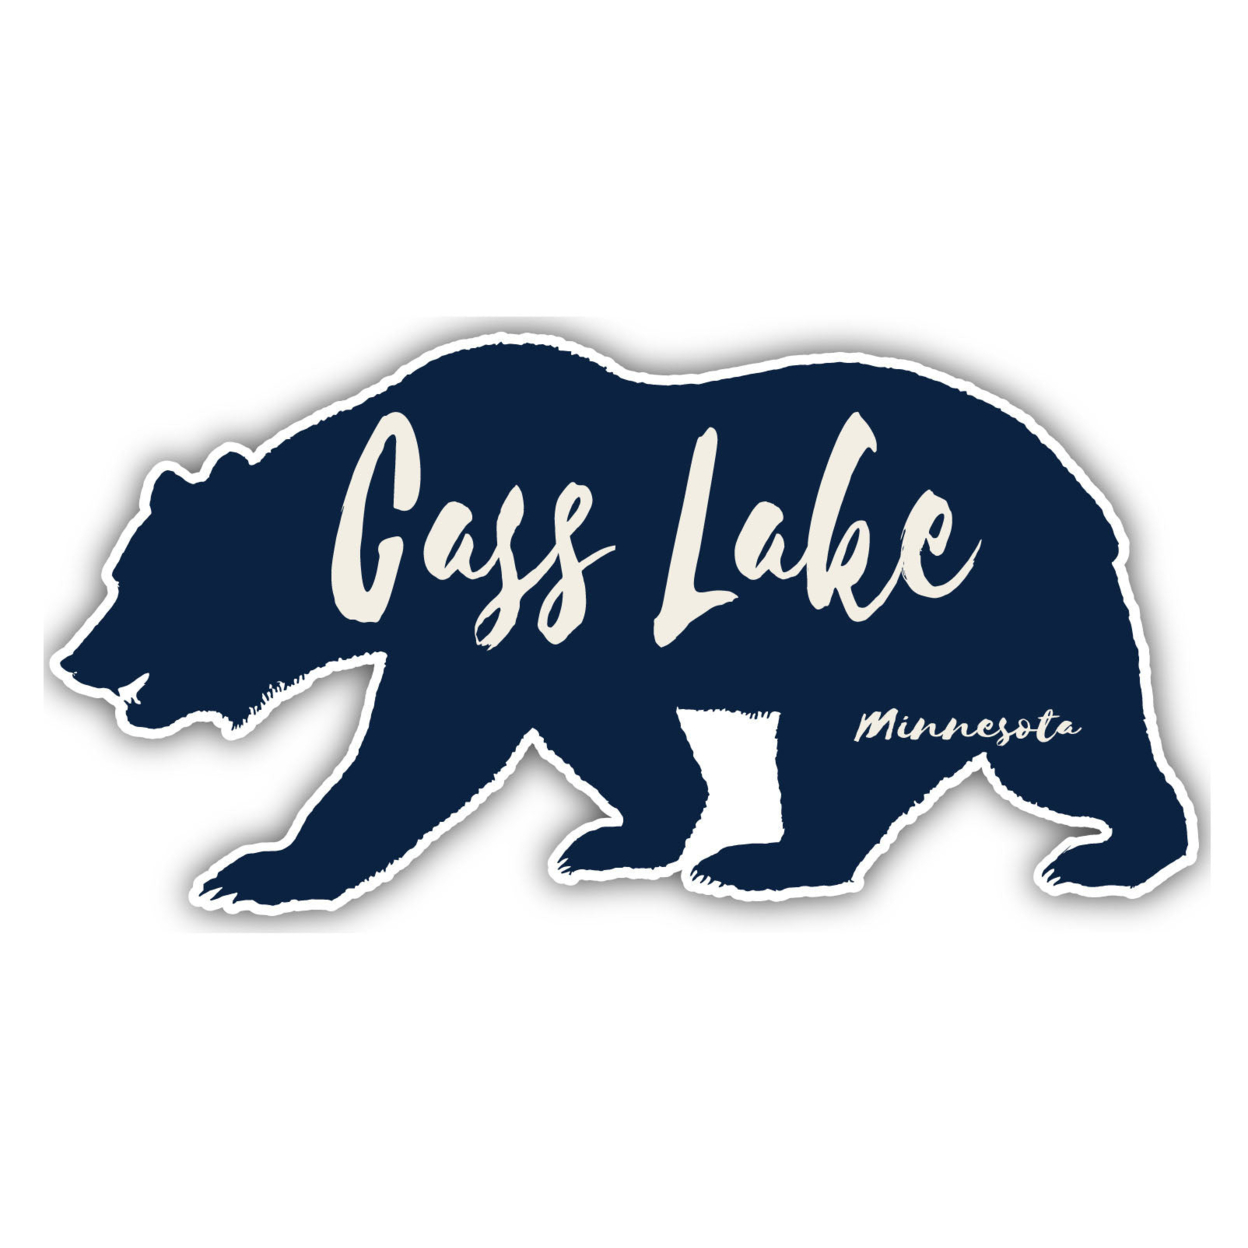 Cass Lake Minnesota Souvenir Decorative Stickers (Choose Theme And Size) - 4-Pack, 2-Inch, Tent